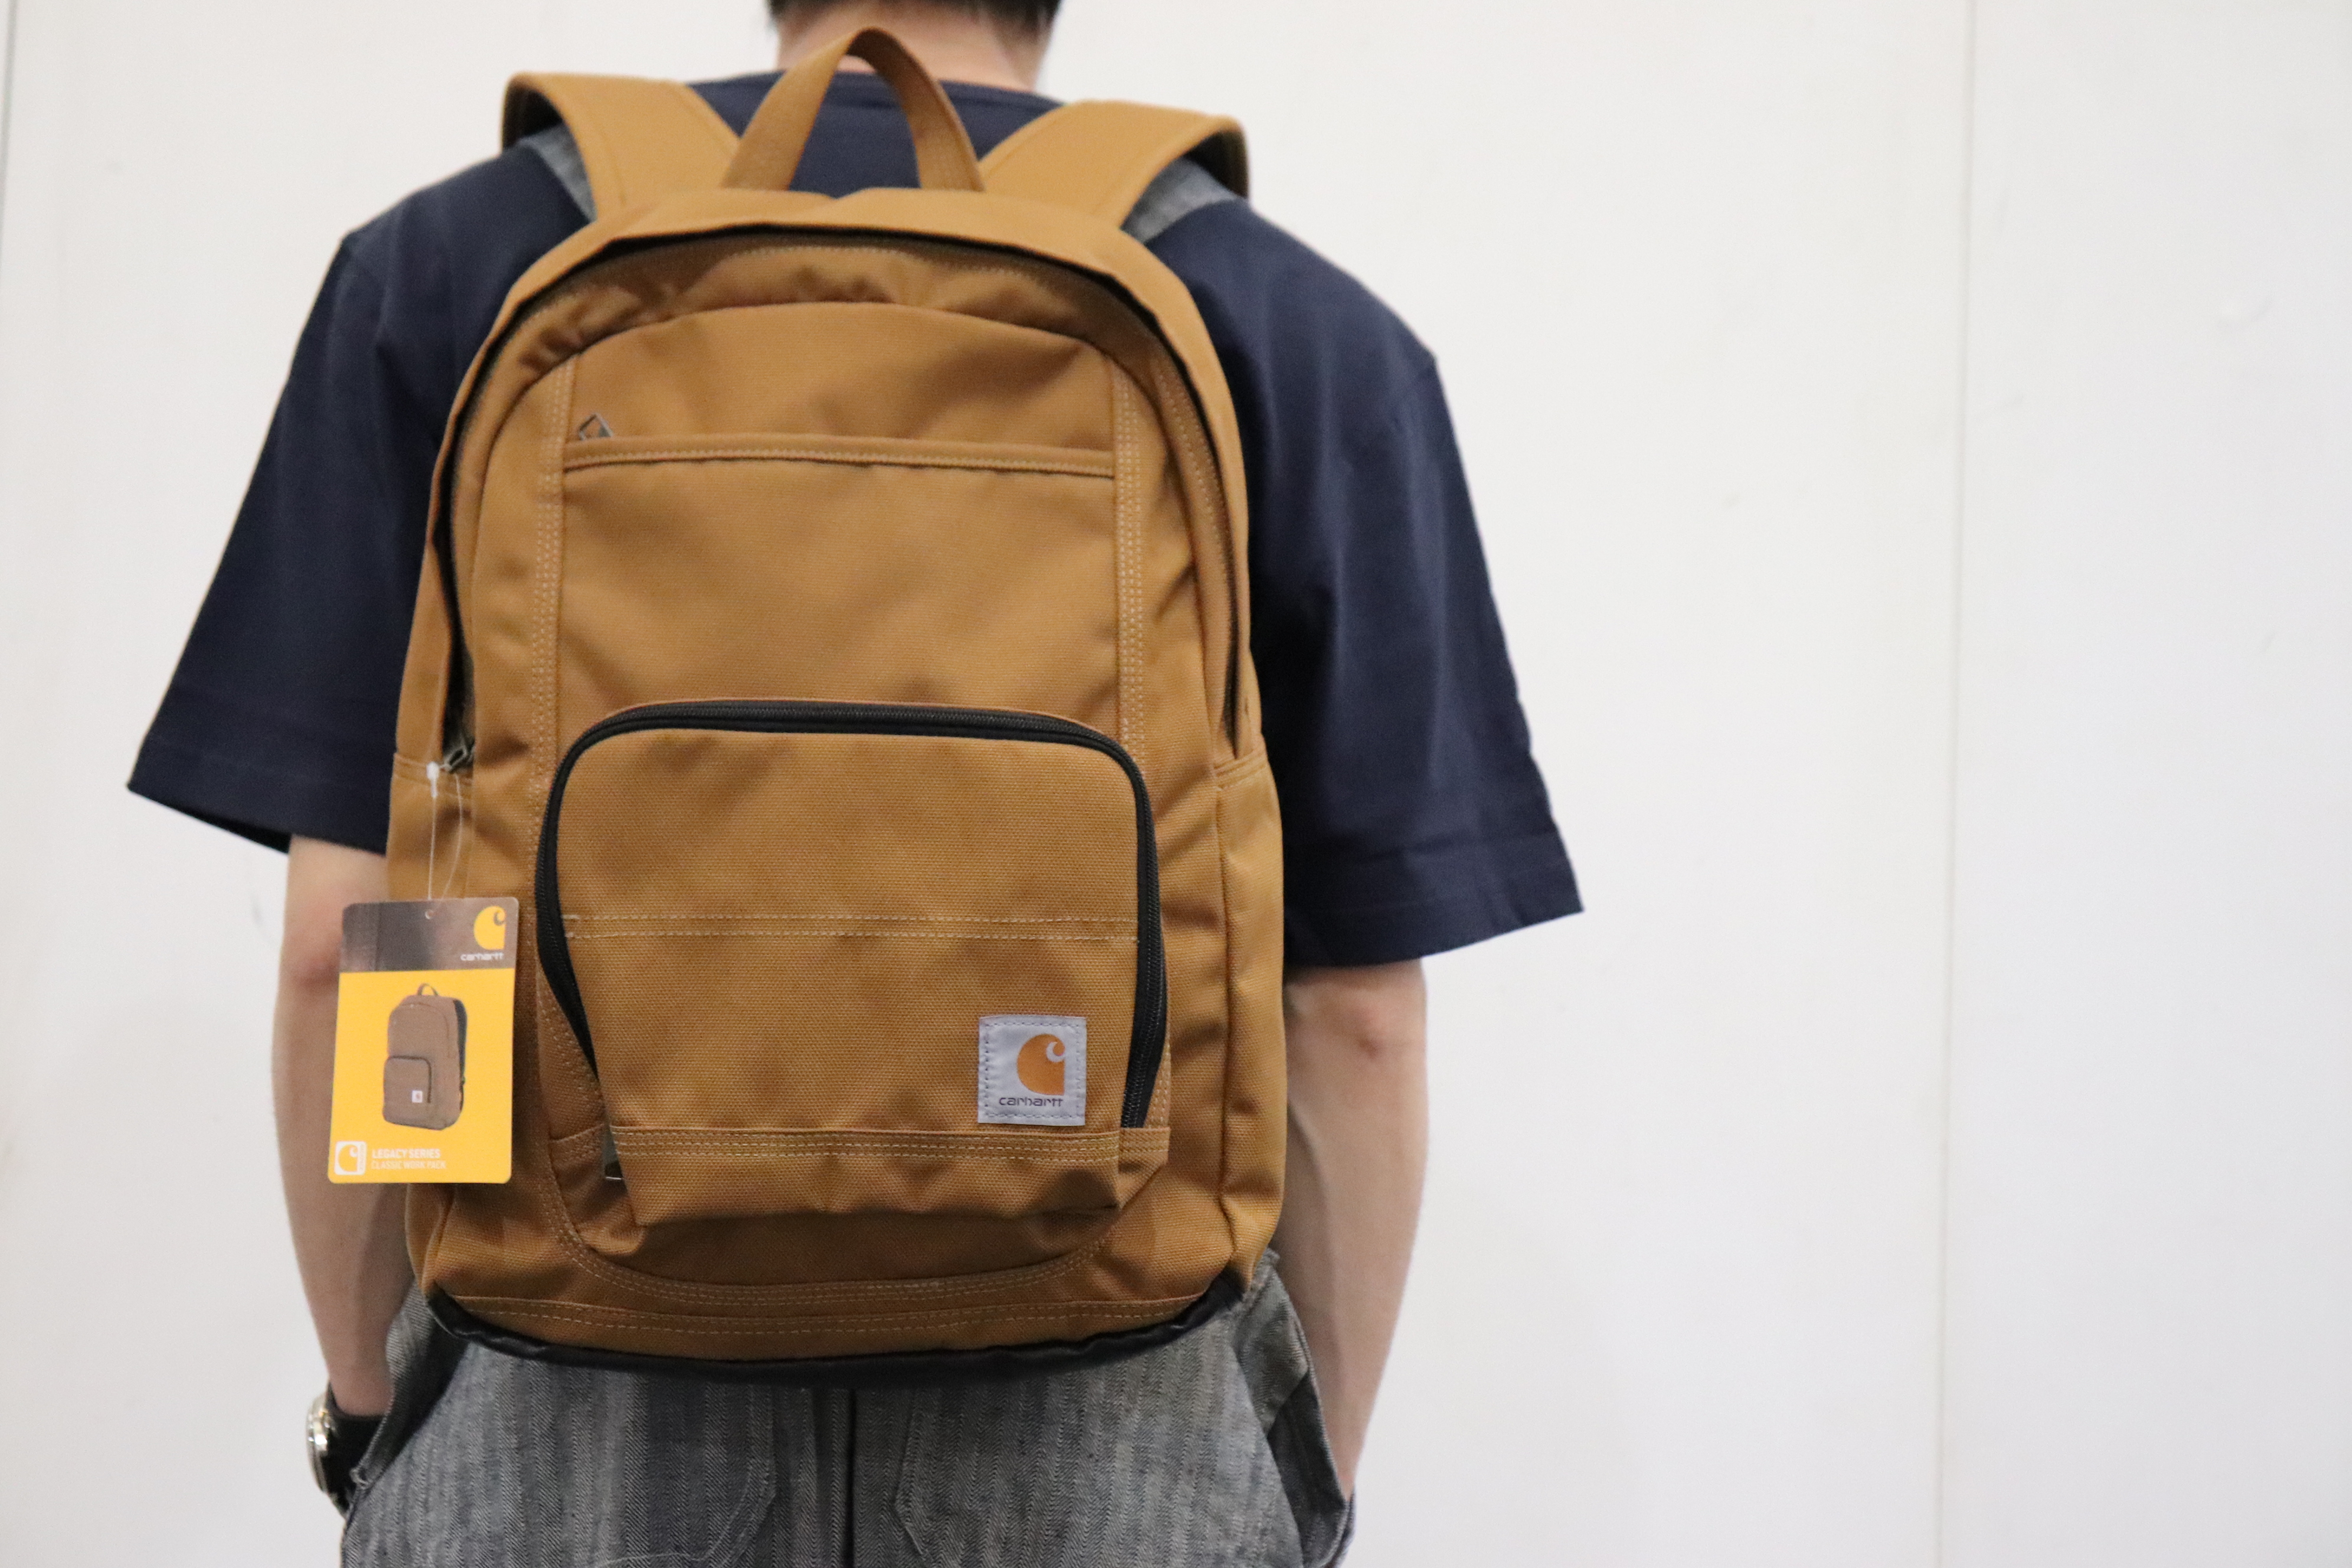 Carhartt Back Pack カーハート アメリカ規格 バックパック Roger S Vintage Used Clothing